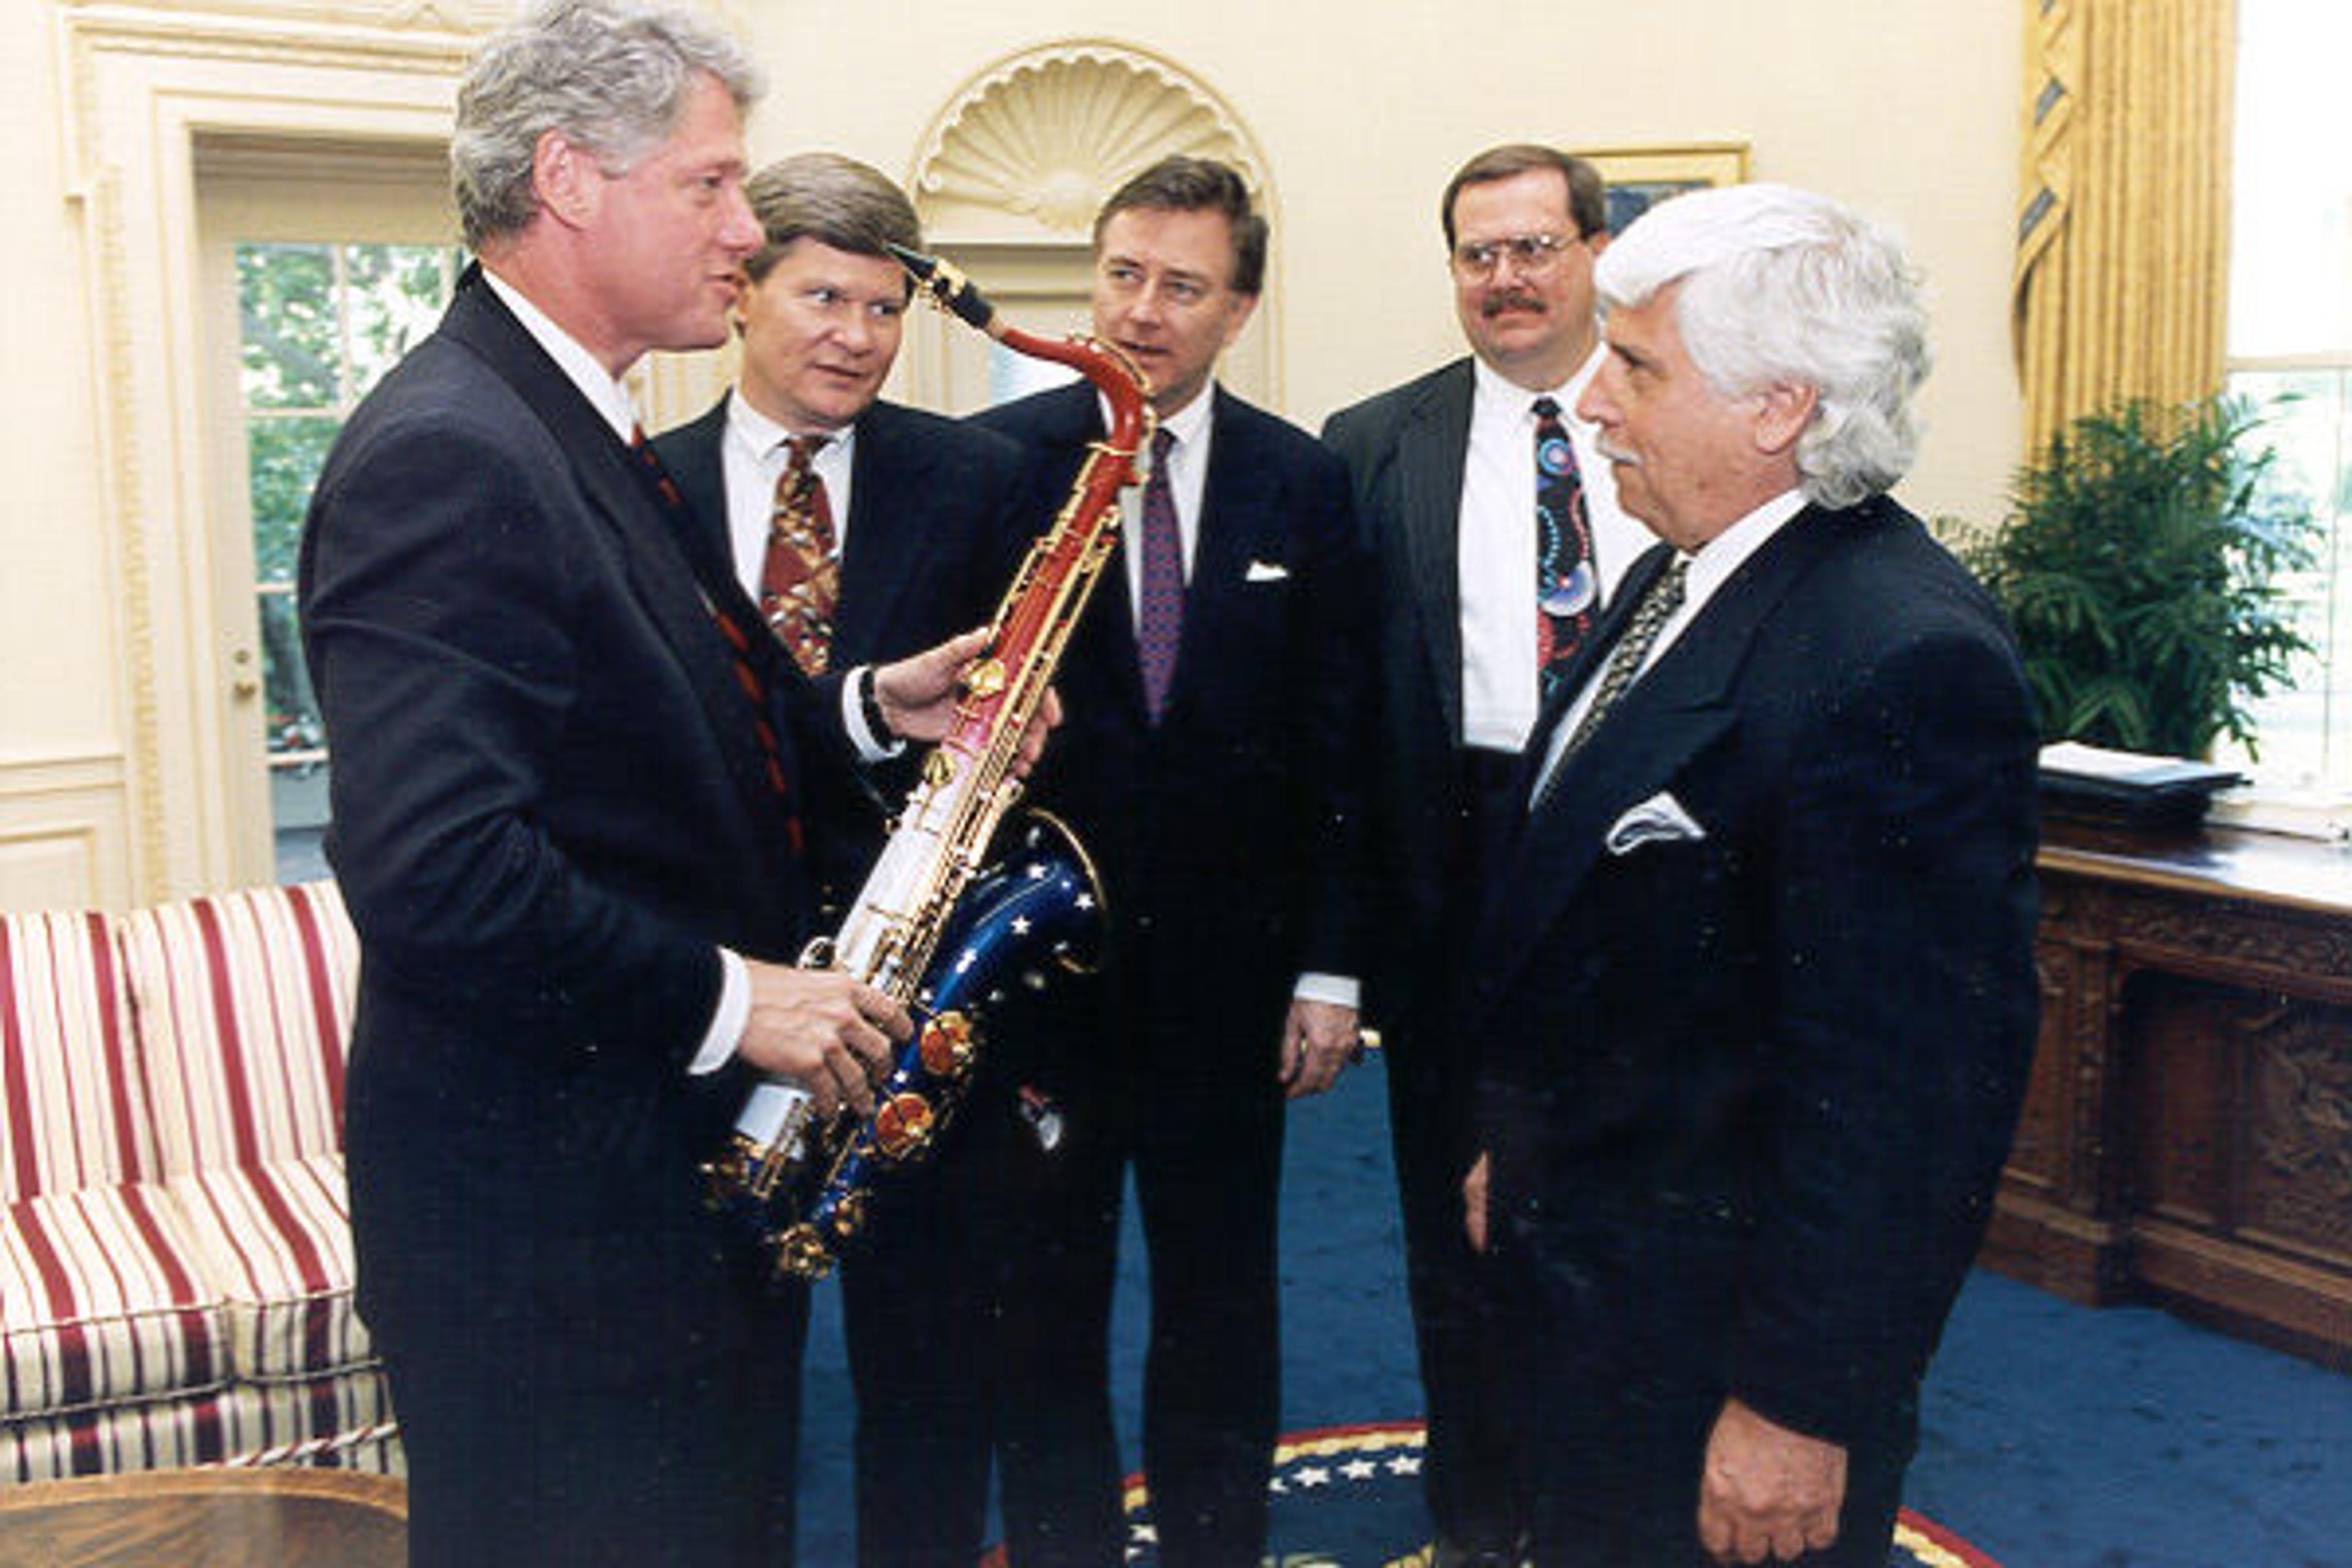 President Bill Clinton accepts the limited-edition Presidential Model tenor saxophone built in his honor by the L.A. Sax Company, Barrington, Illinois. Peter LaPlaca, president and CEO of L.A. Sax, made the presentation to Clinton in the Oval Office on May 16, 1994. Witnessing the presentation were (left to right) Congressman Tim Johnson (D-SD), Senator Larry Pressler (R-SD), and John Hilbert, vice president for University Relations, University of South Dakota. Photograph courtesy of the White House